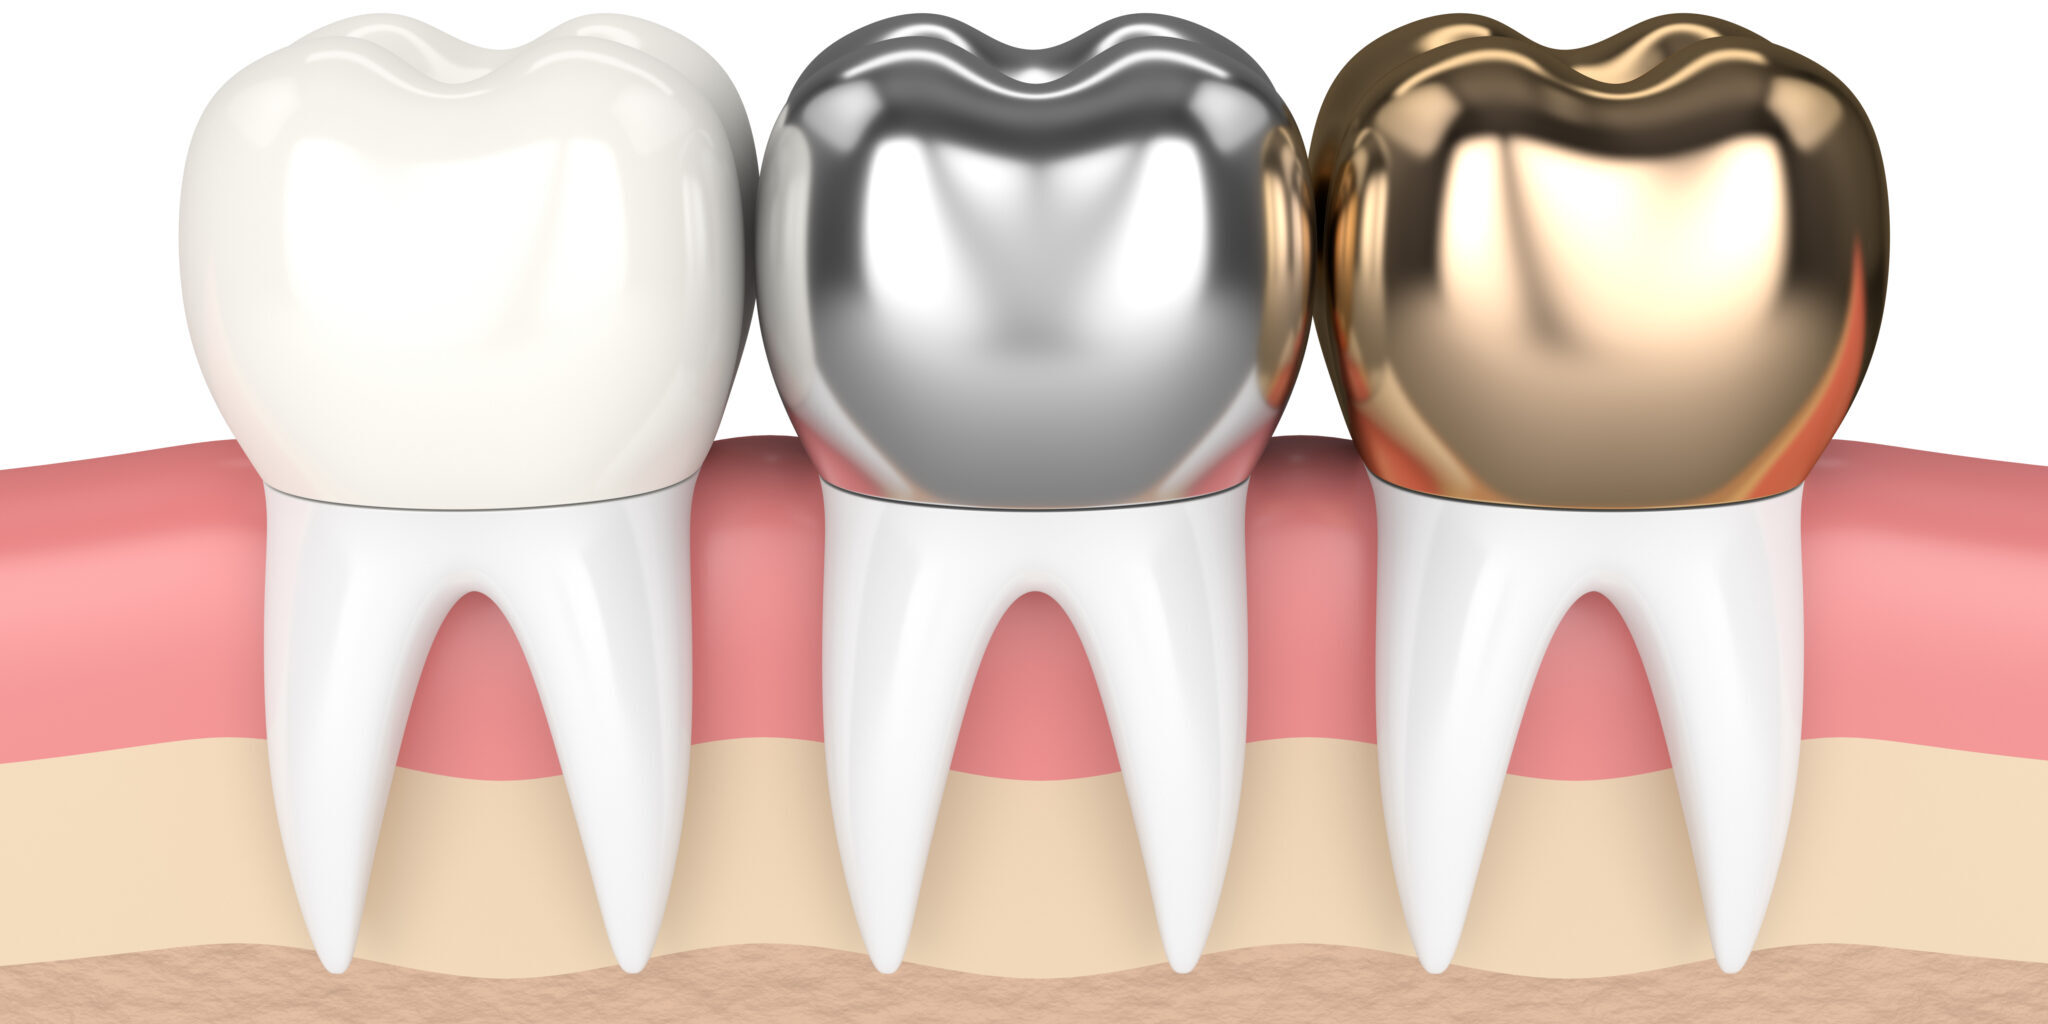 Check the advantages and disadvantages of dental crowns